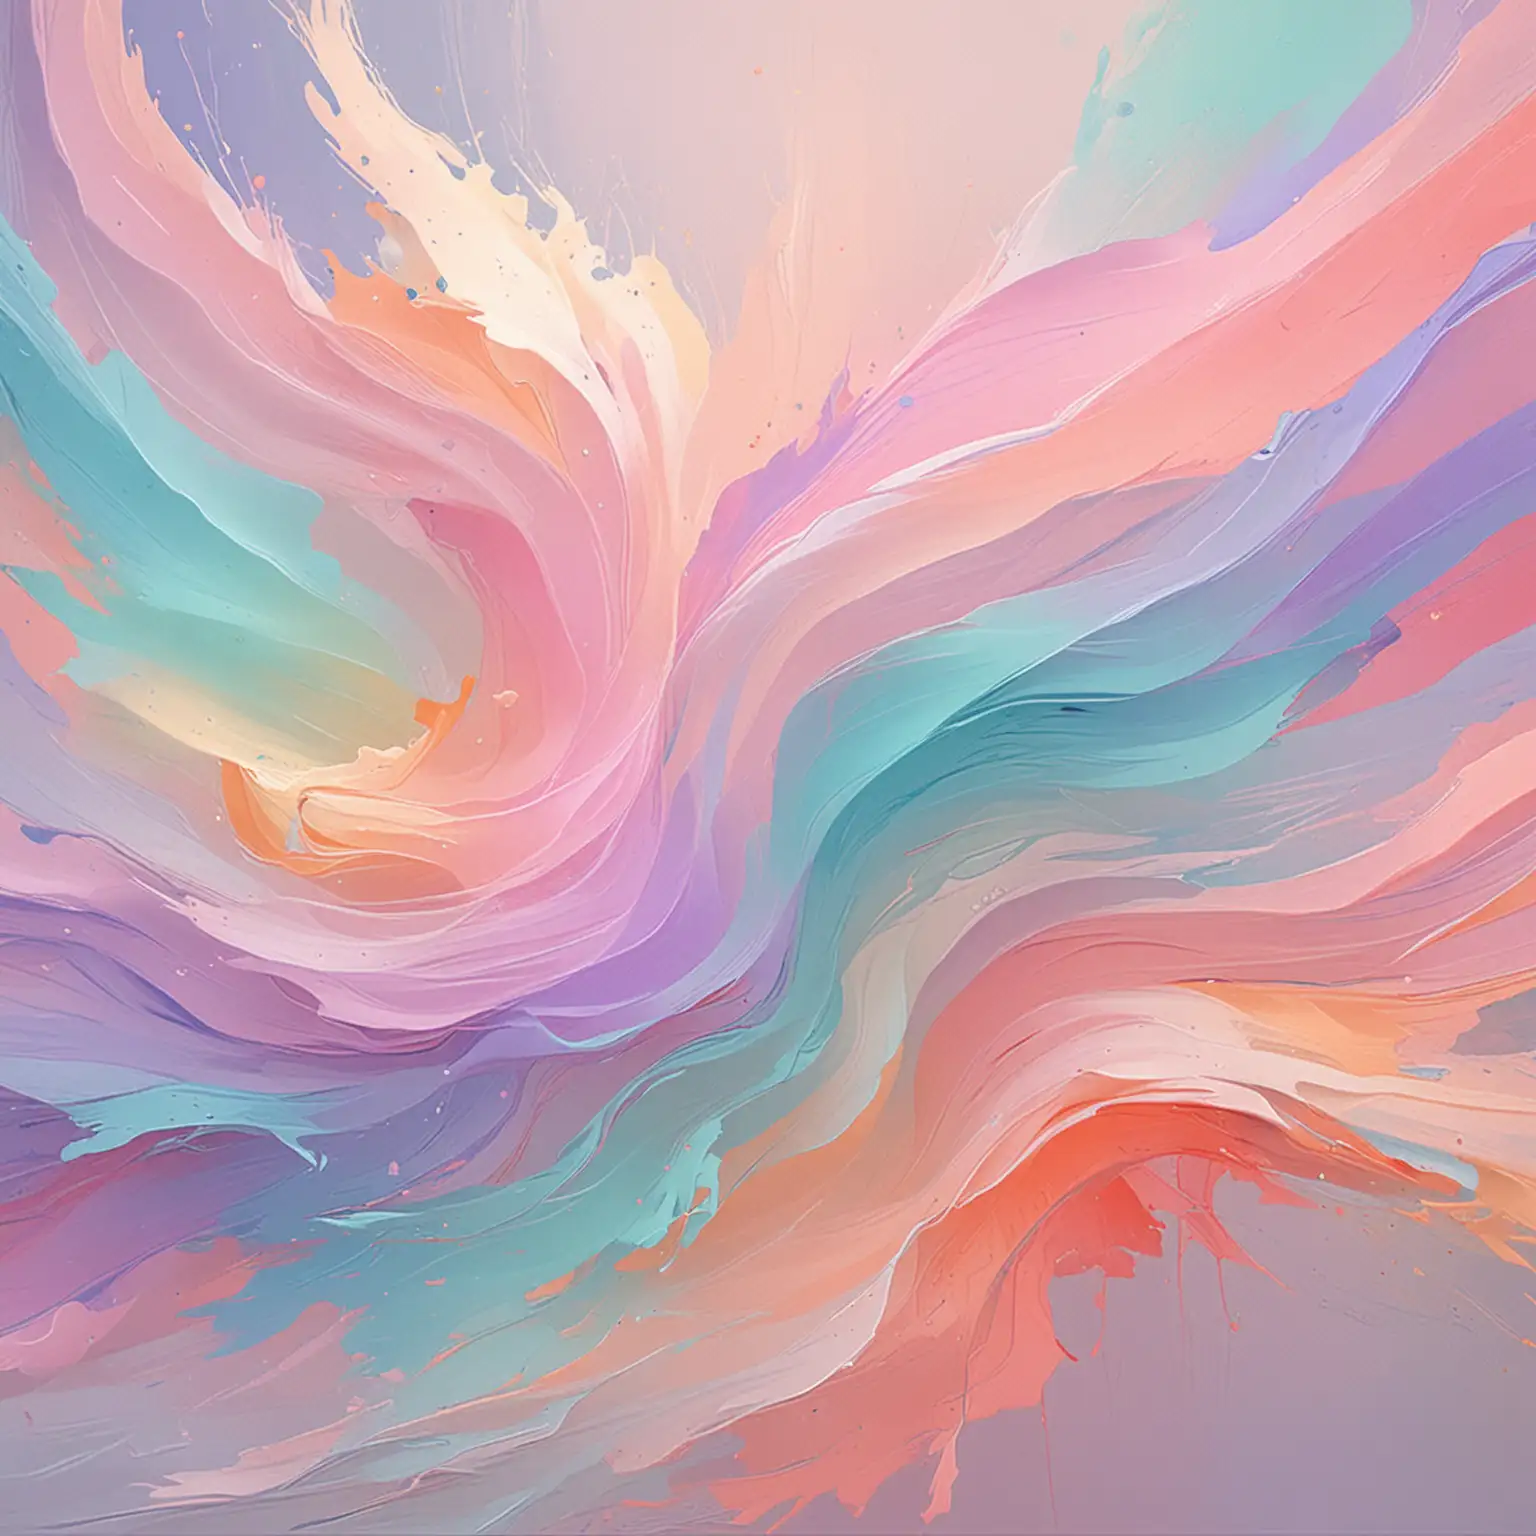 Vibrant Pastel Colors Abstract Artwork Bursting with Energy